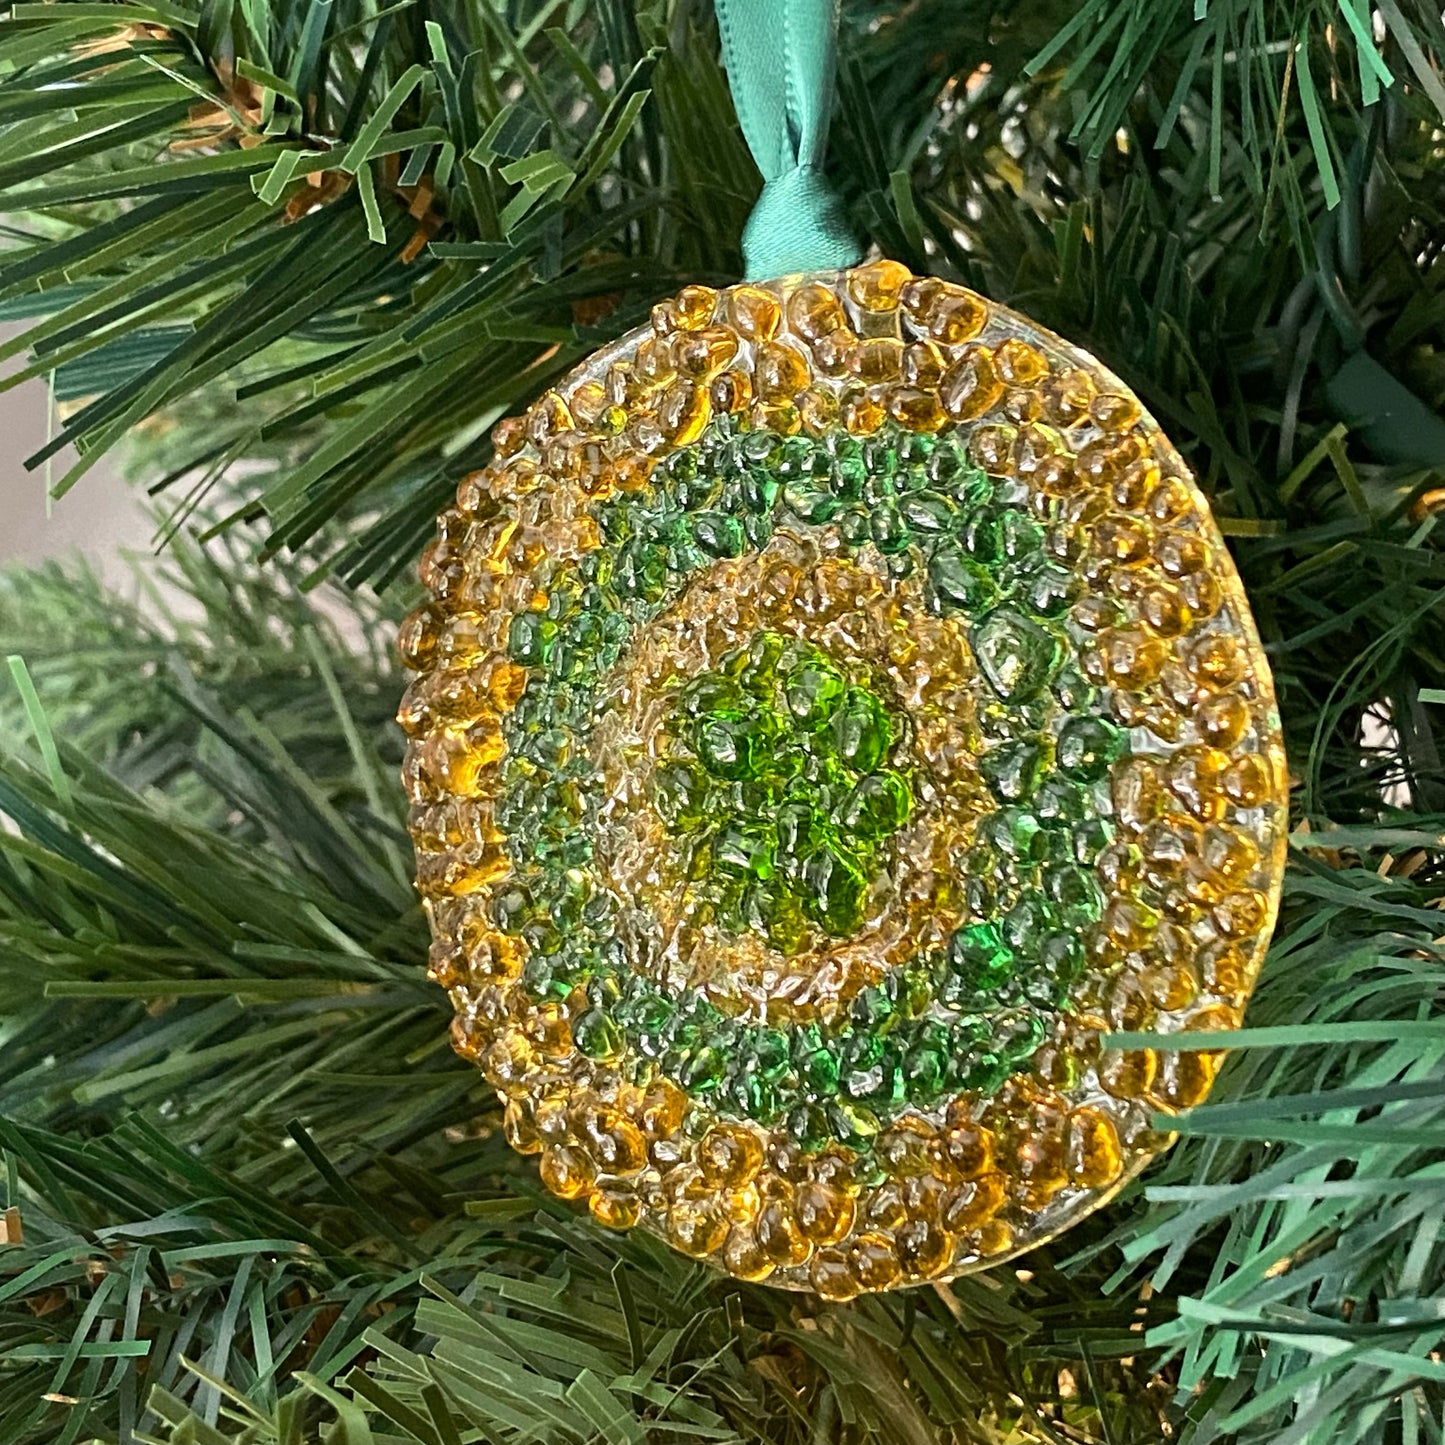 Bullseye Frit Ornament in Gold and Green